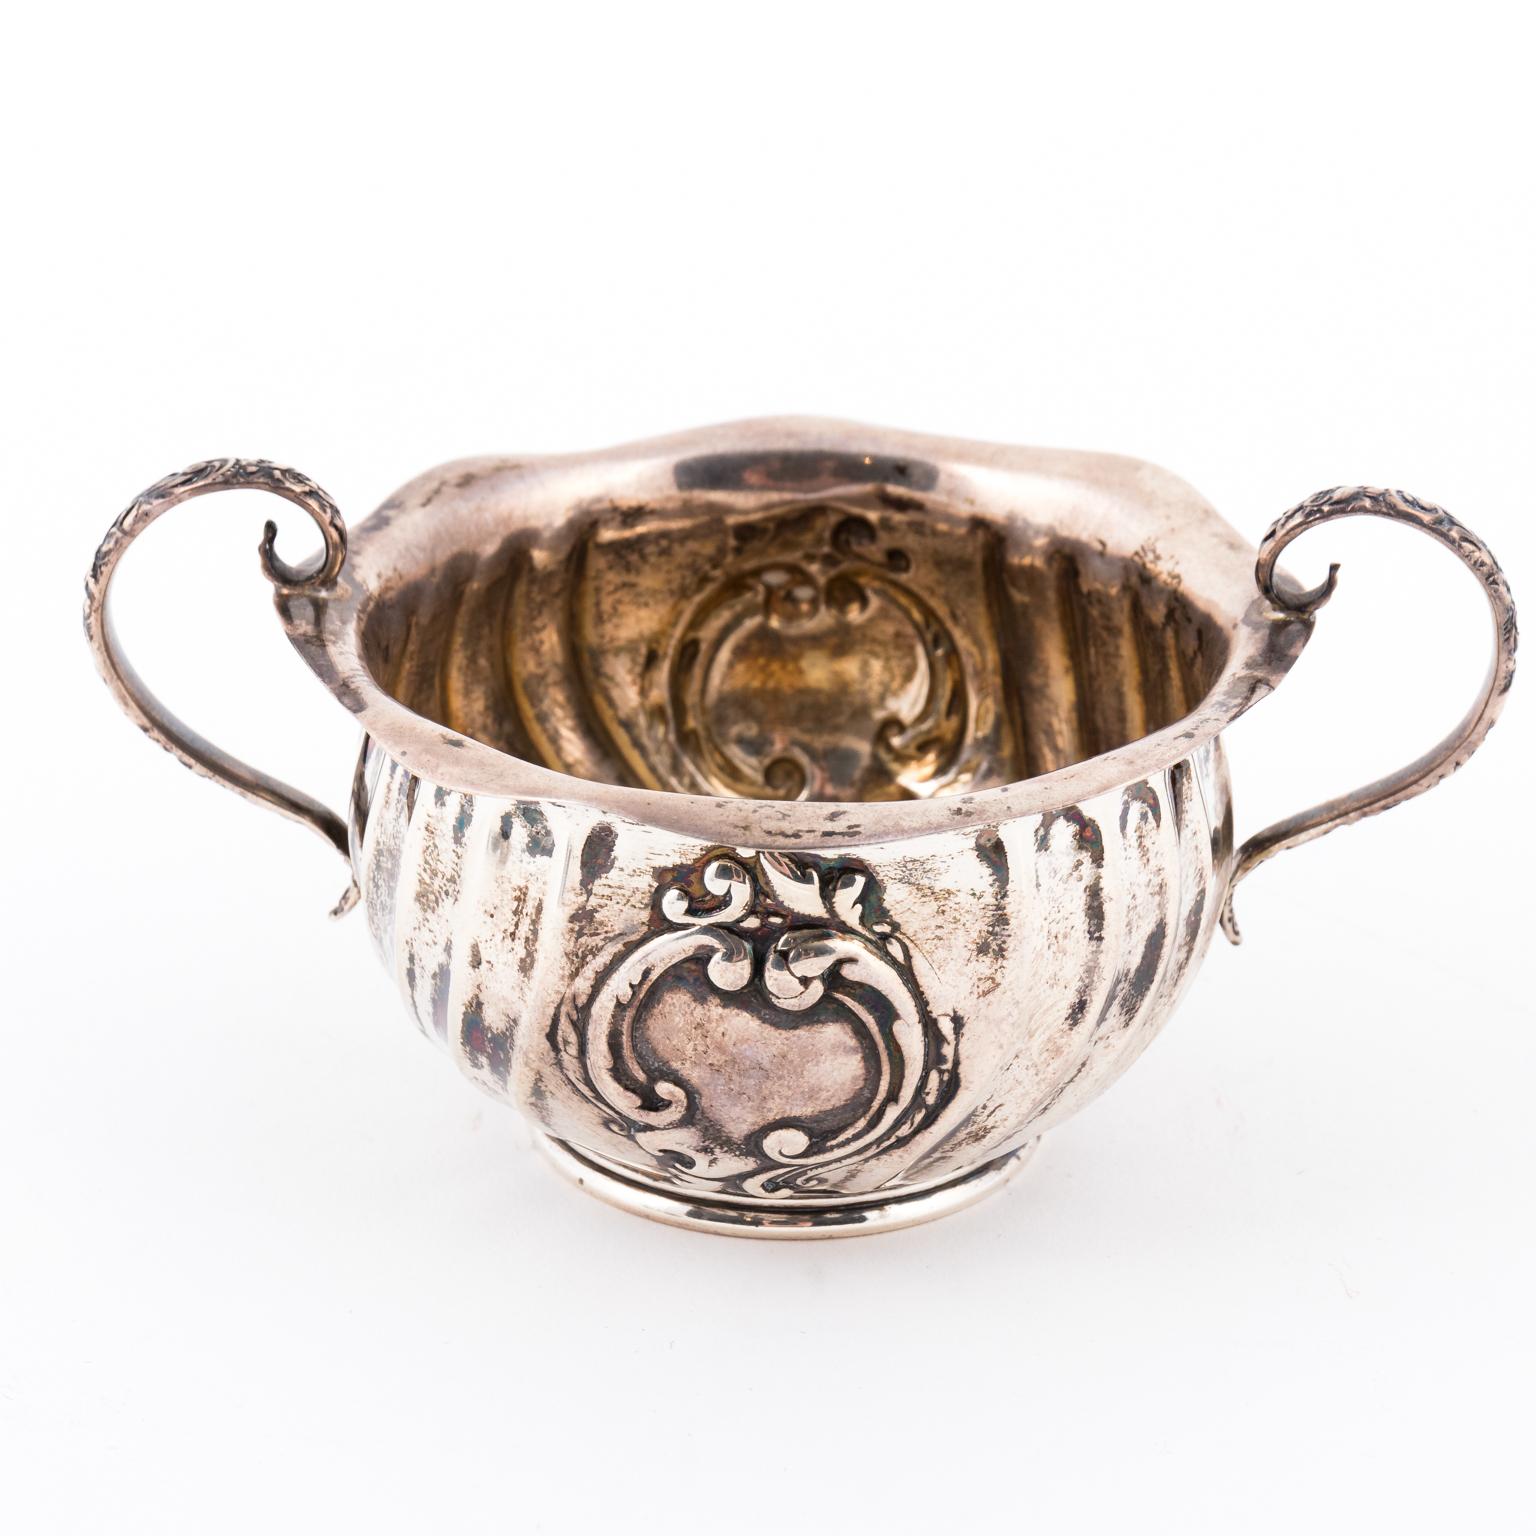 Repoussé Early 20th Century Sterling Small Three-Piece Tea Set by Gorham